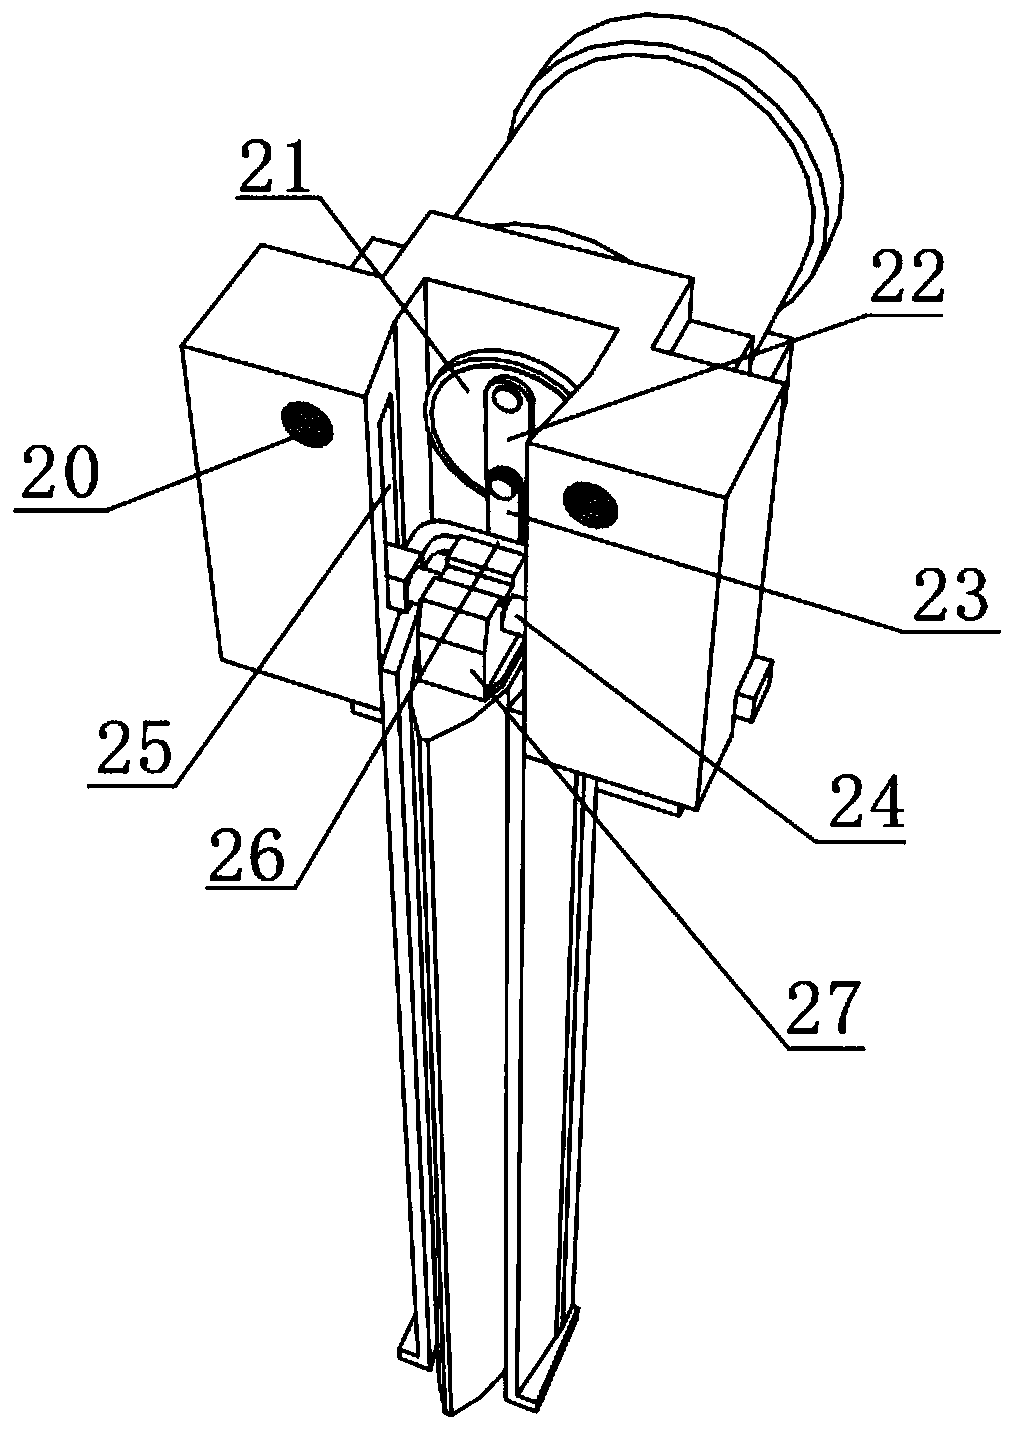 Cloth cutting device for clothing manufacture